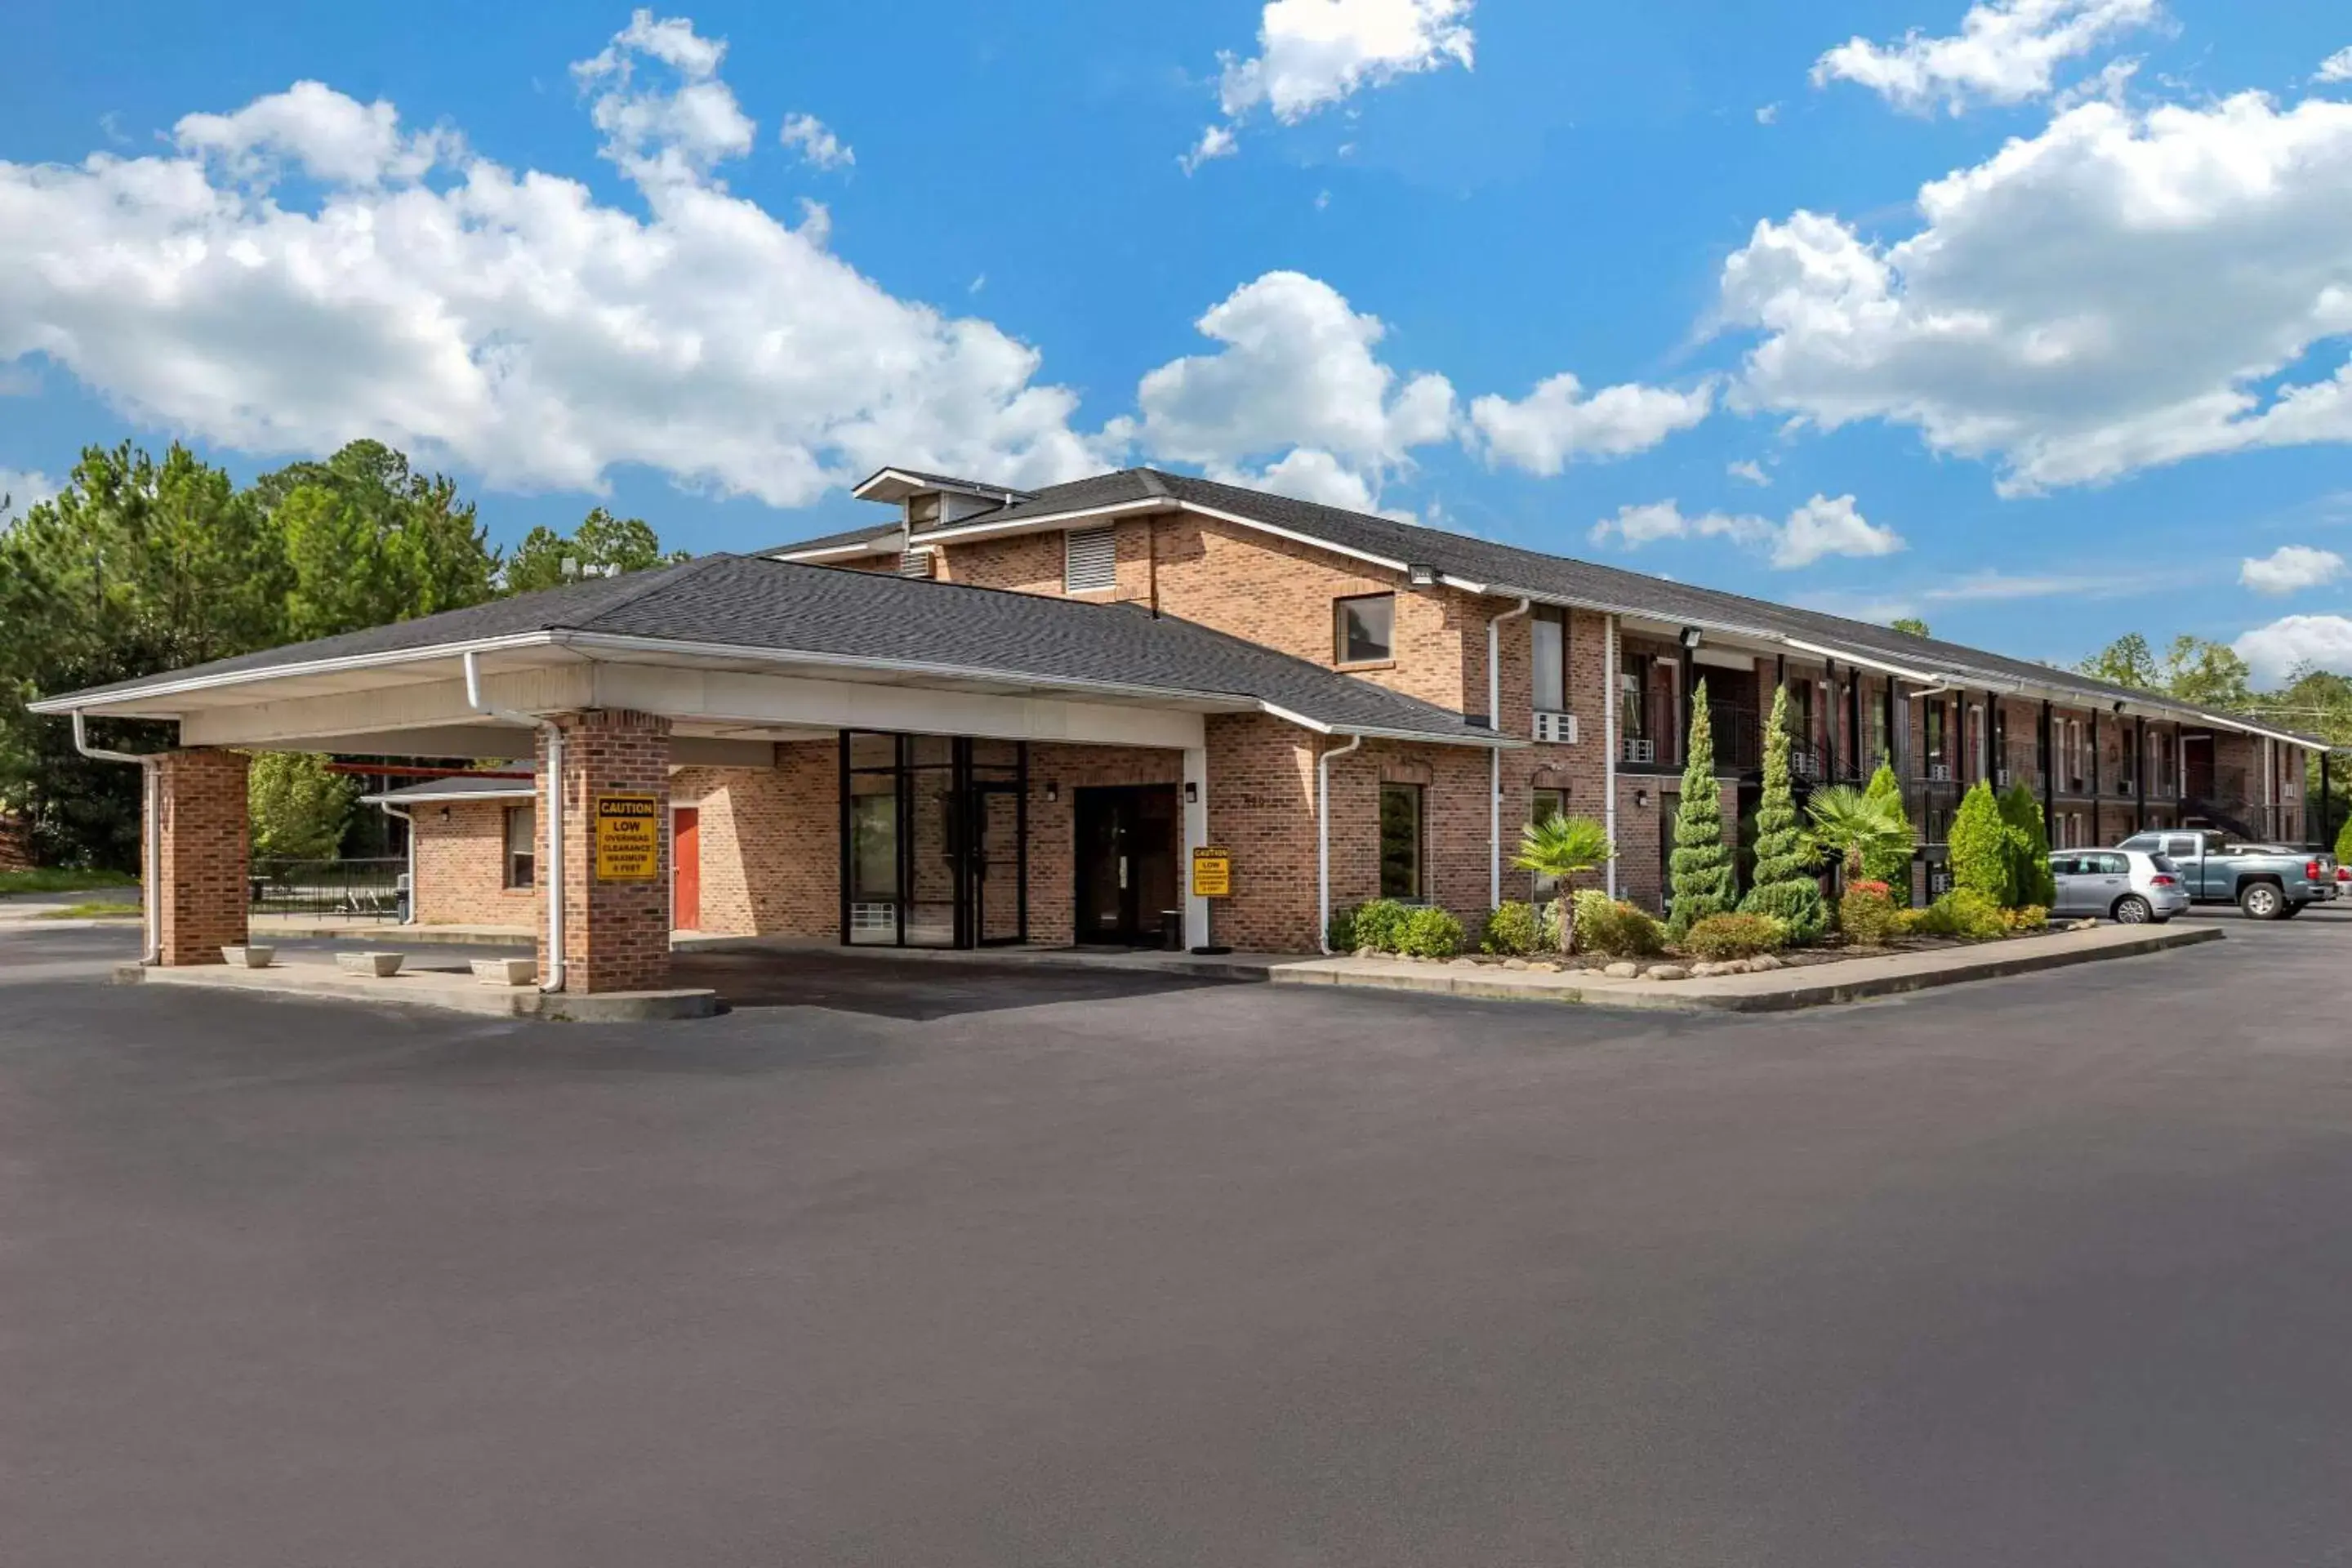 Property Building in Econo Lodge Inn & Suites Lugoff